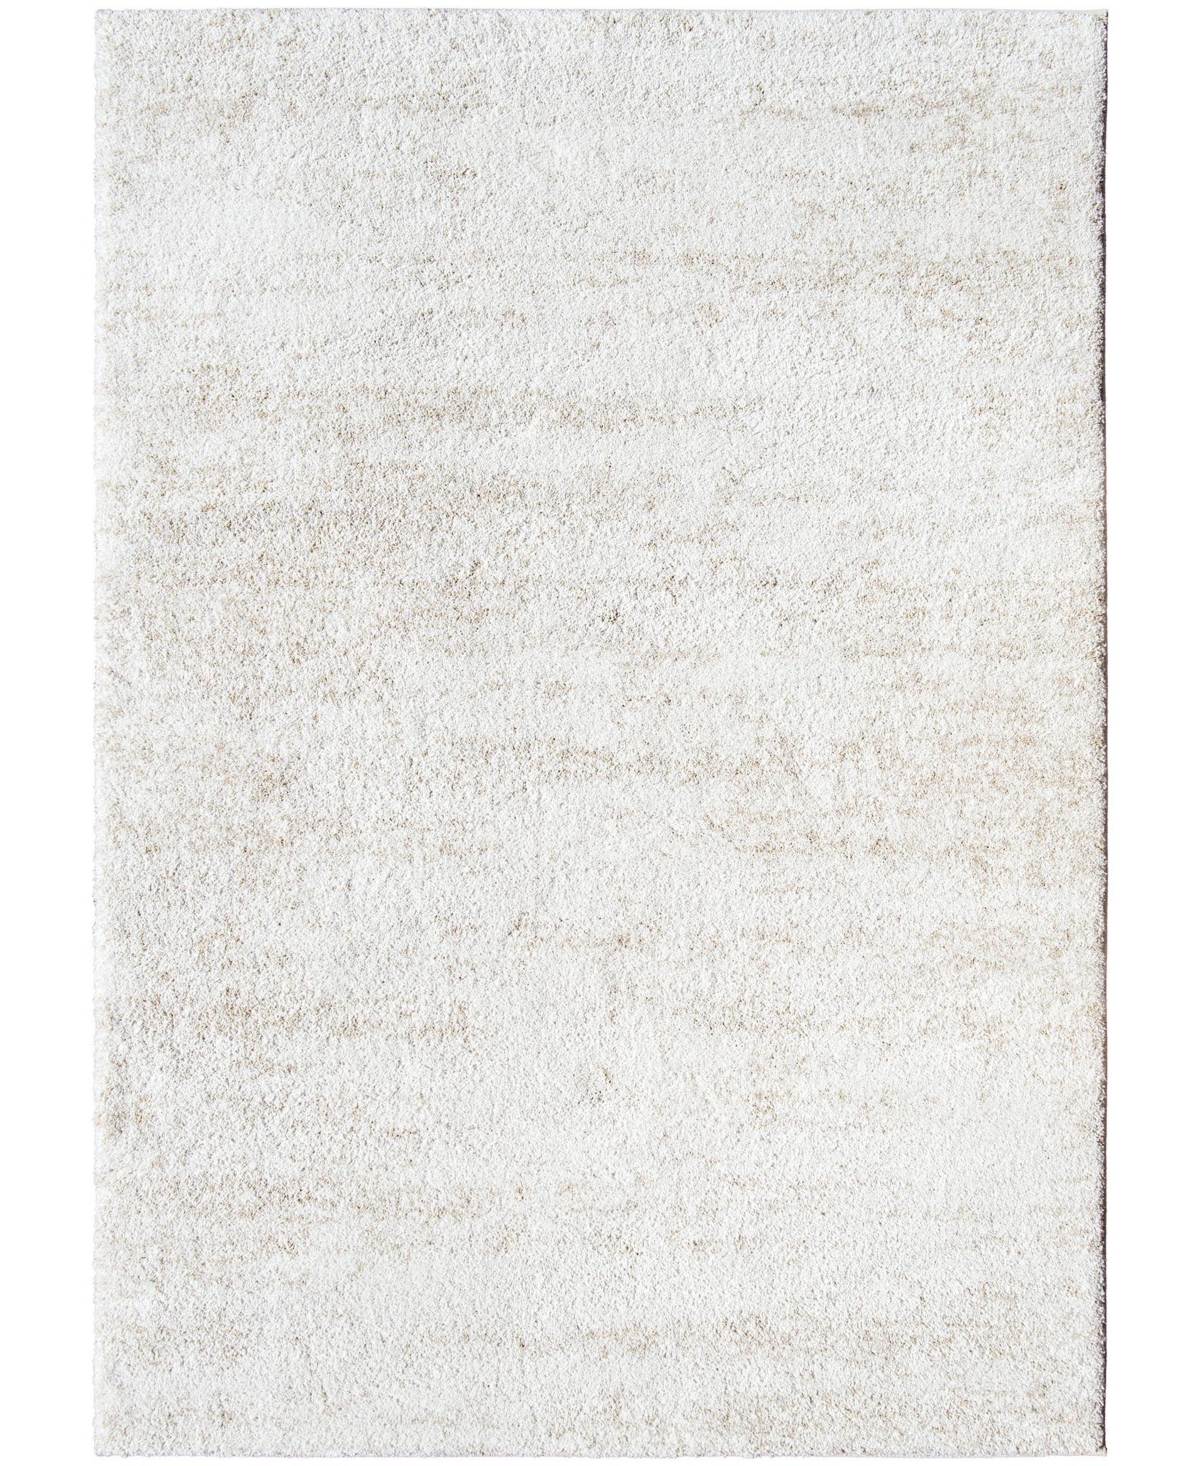 Orian Cloud 19 Solid Mix 6'7in x 9'6in Area Rug - White